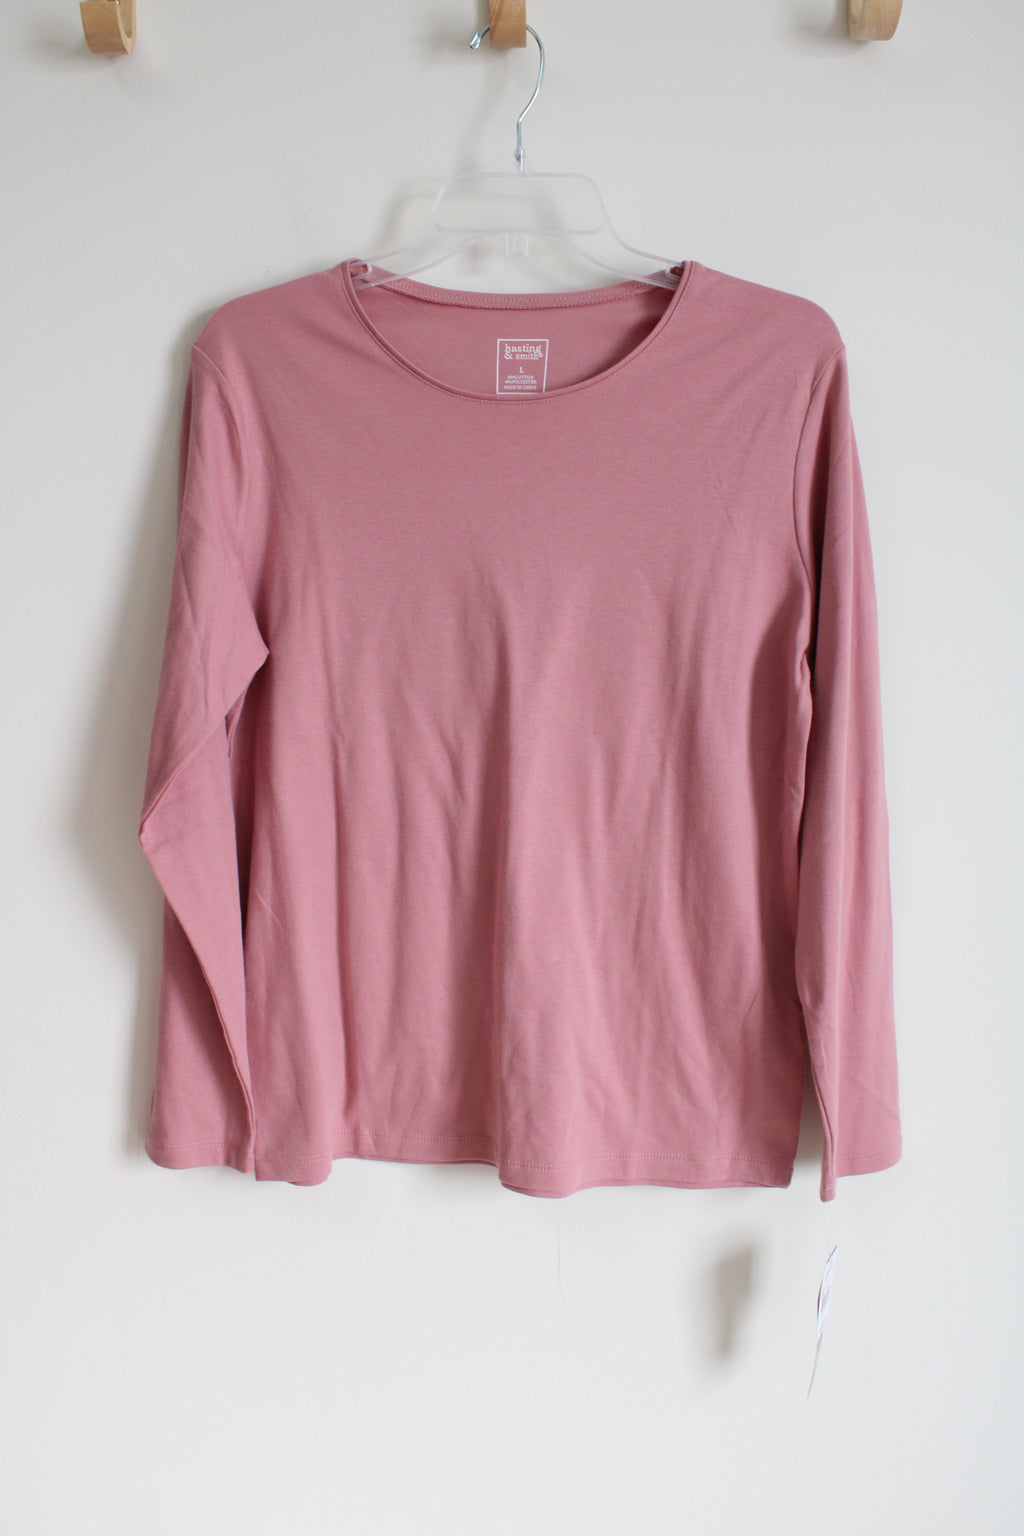 NEW Hasting & Smith Pale Pink Long Sleeved Shirt